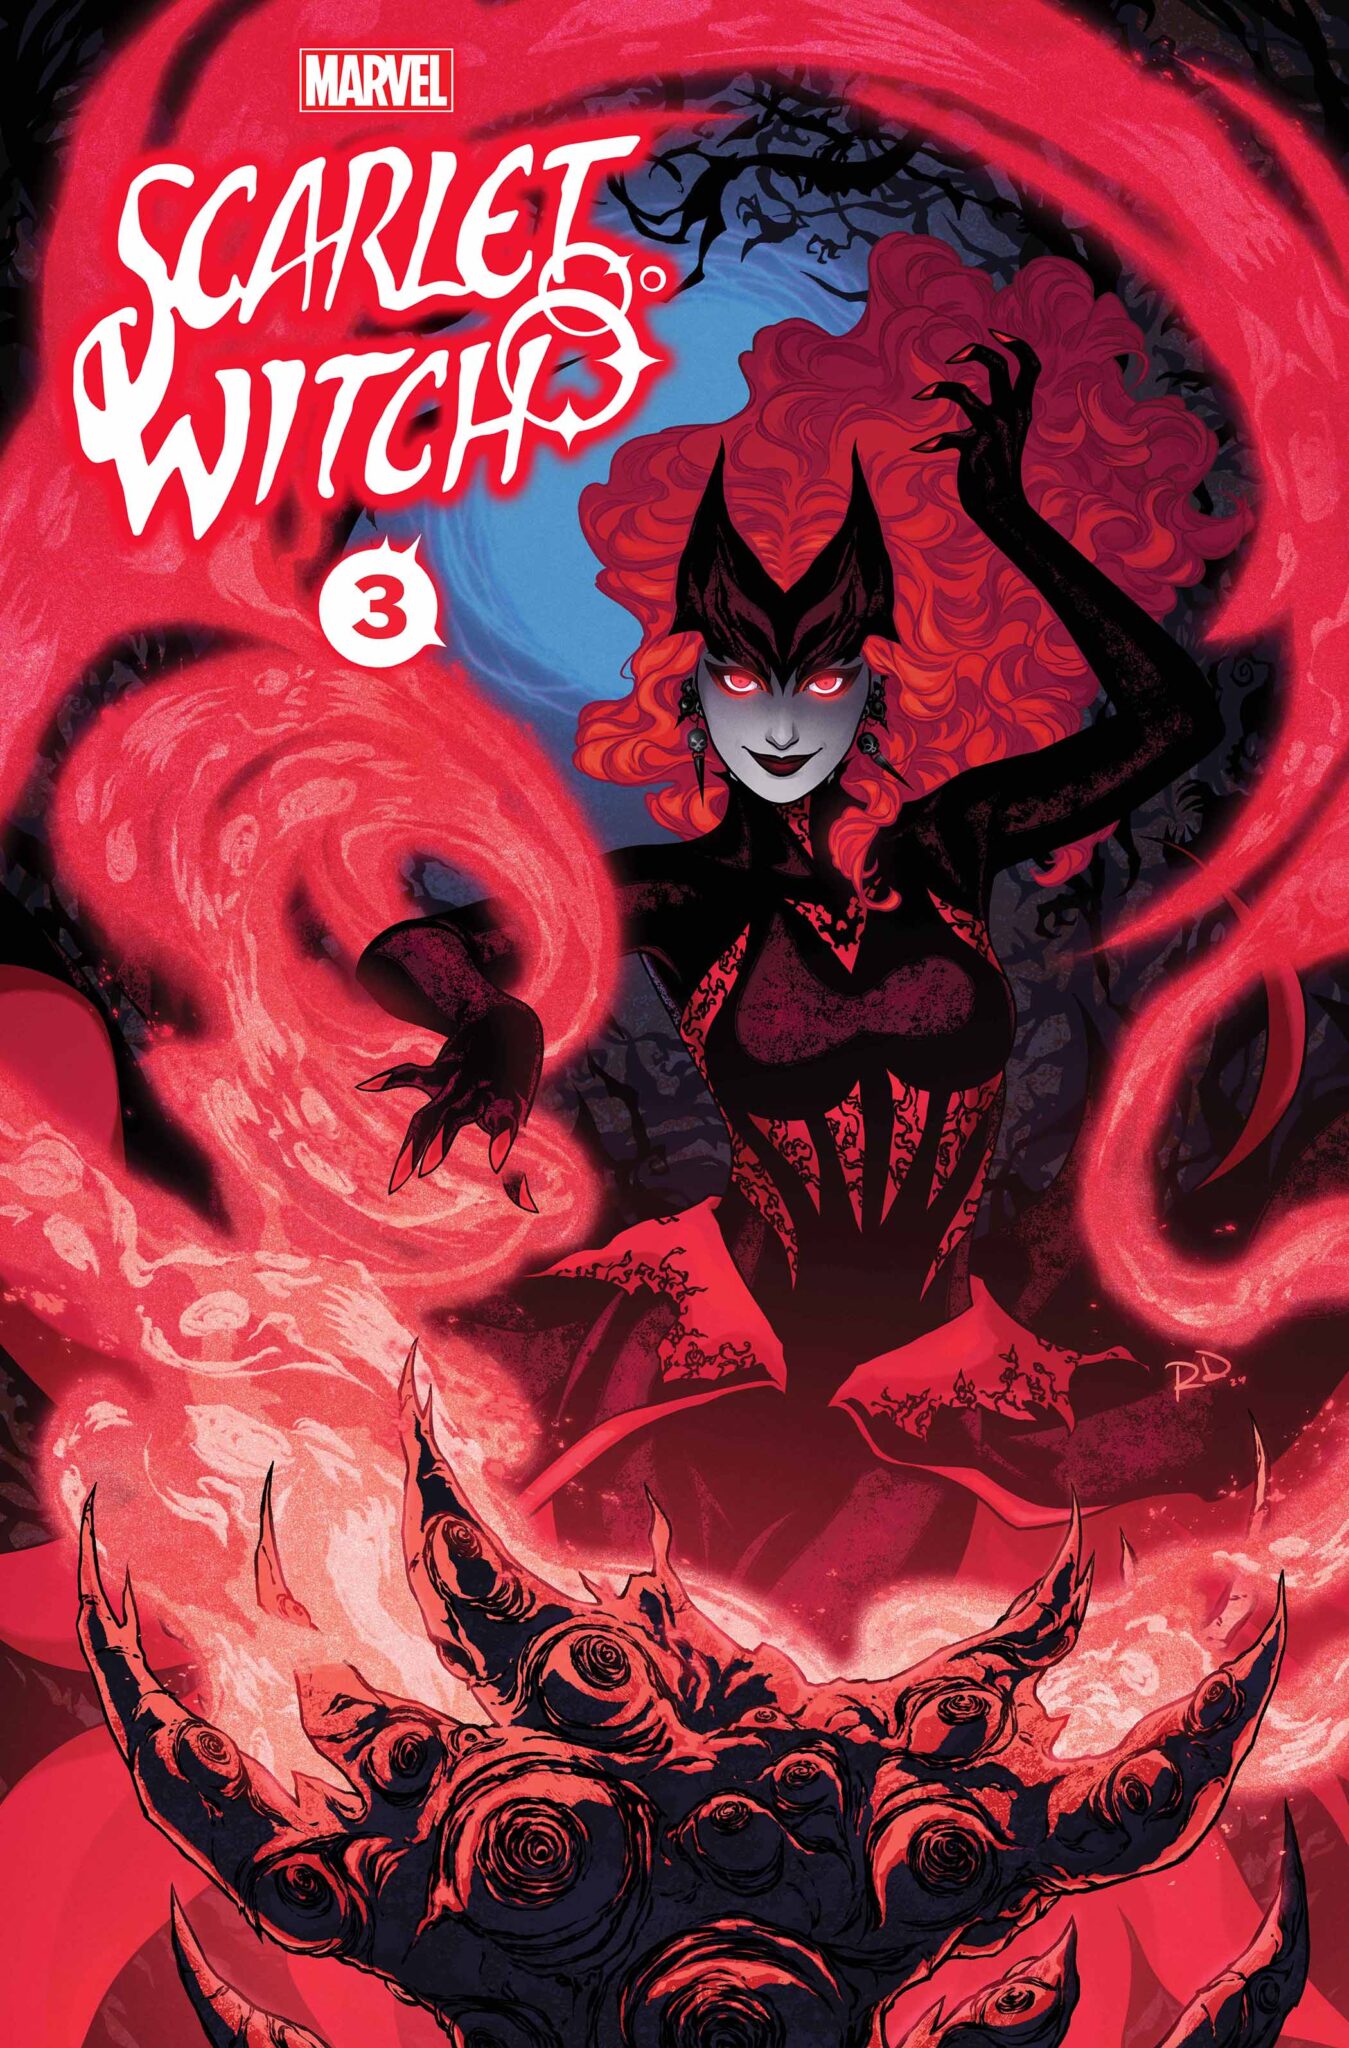 Scarlet Witch #3 cover